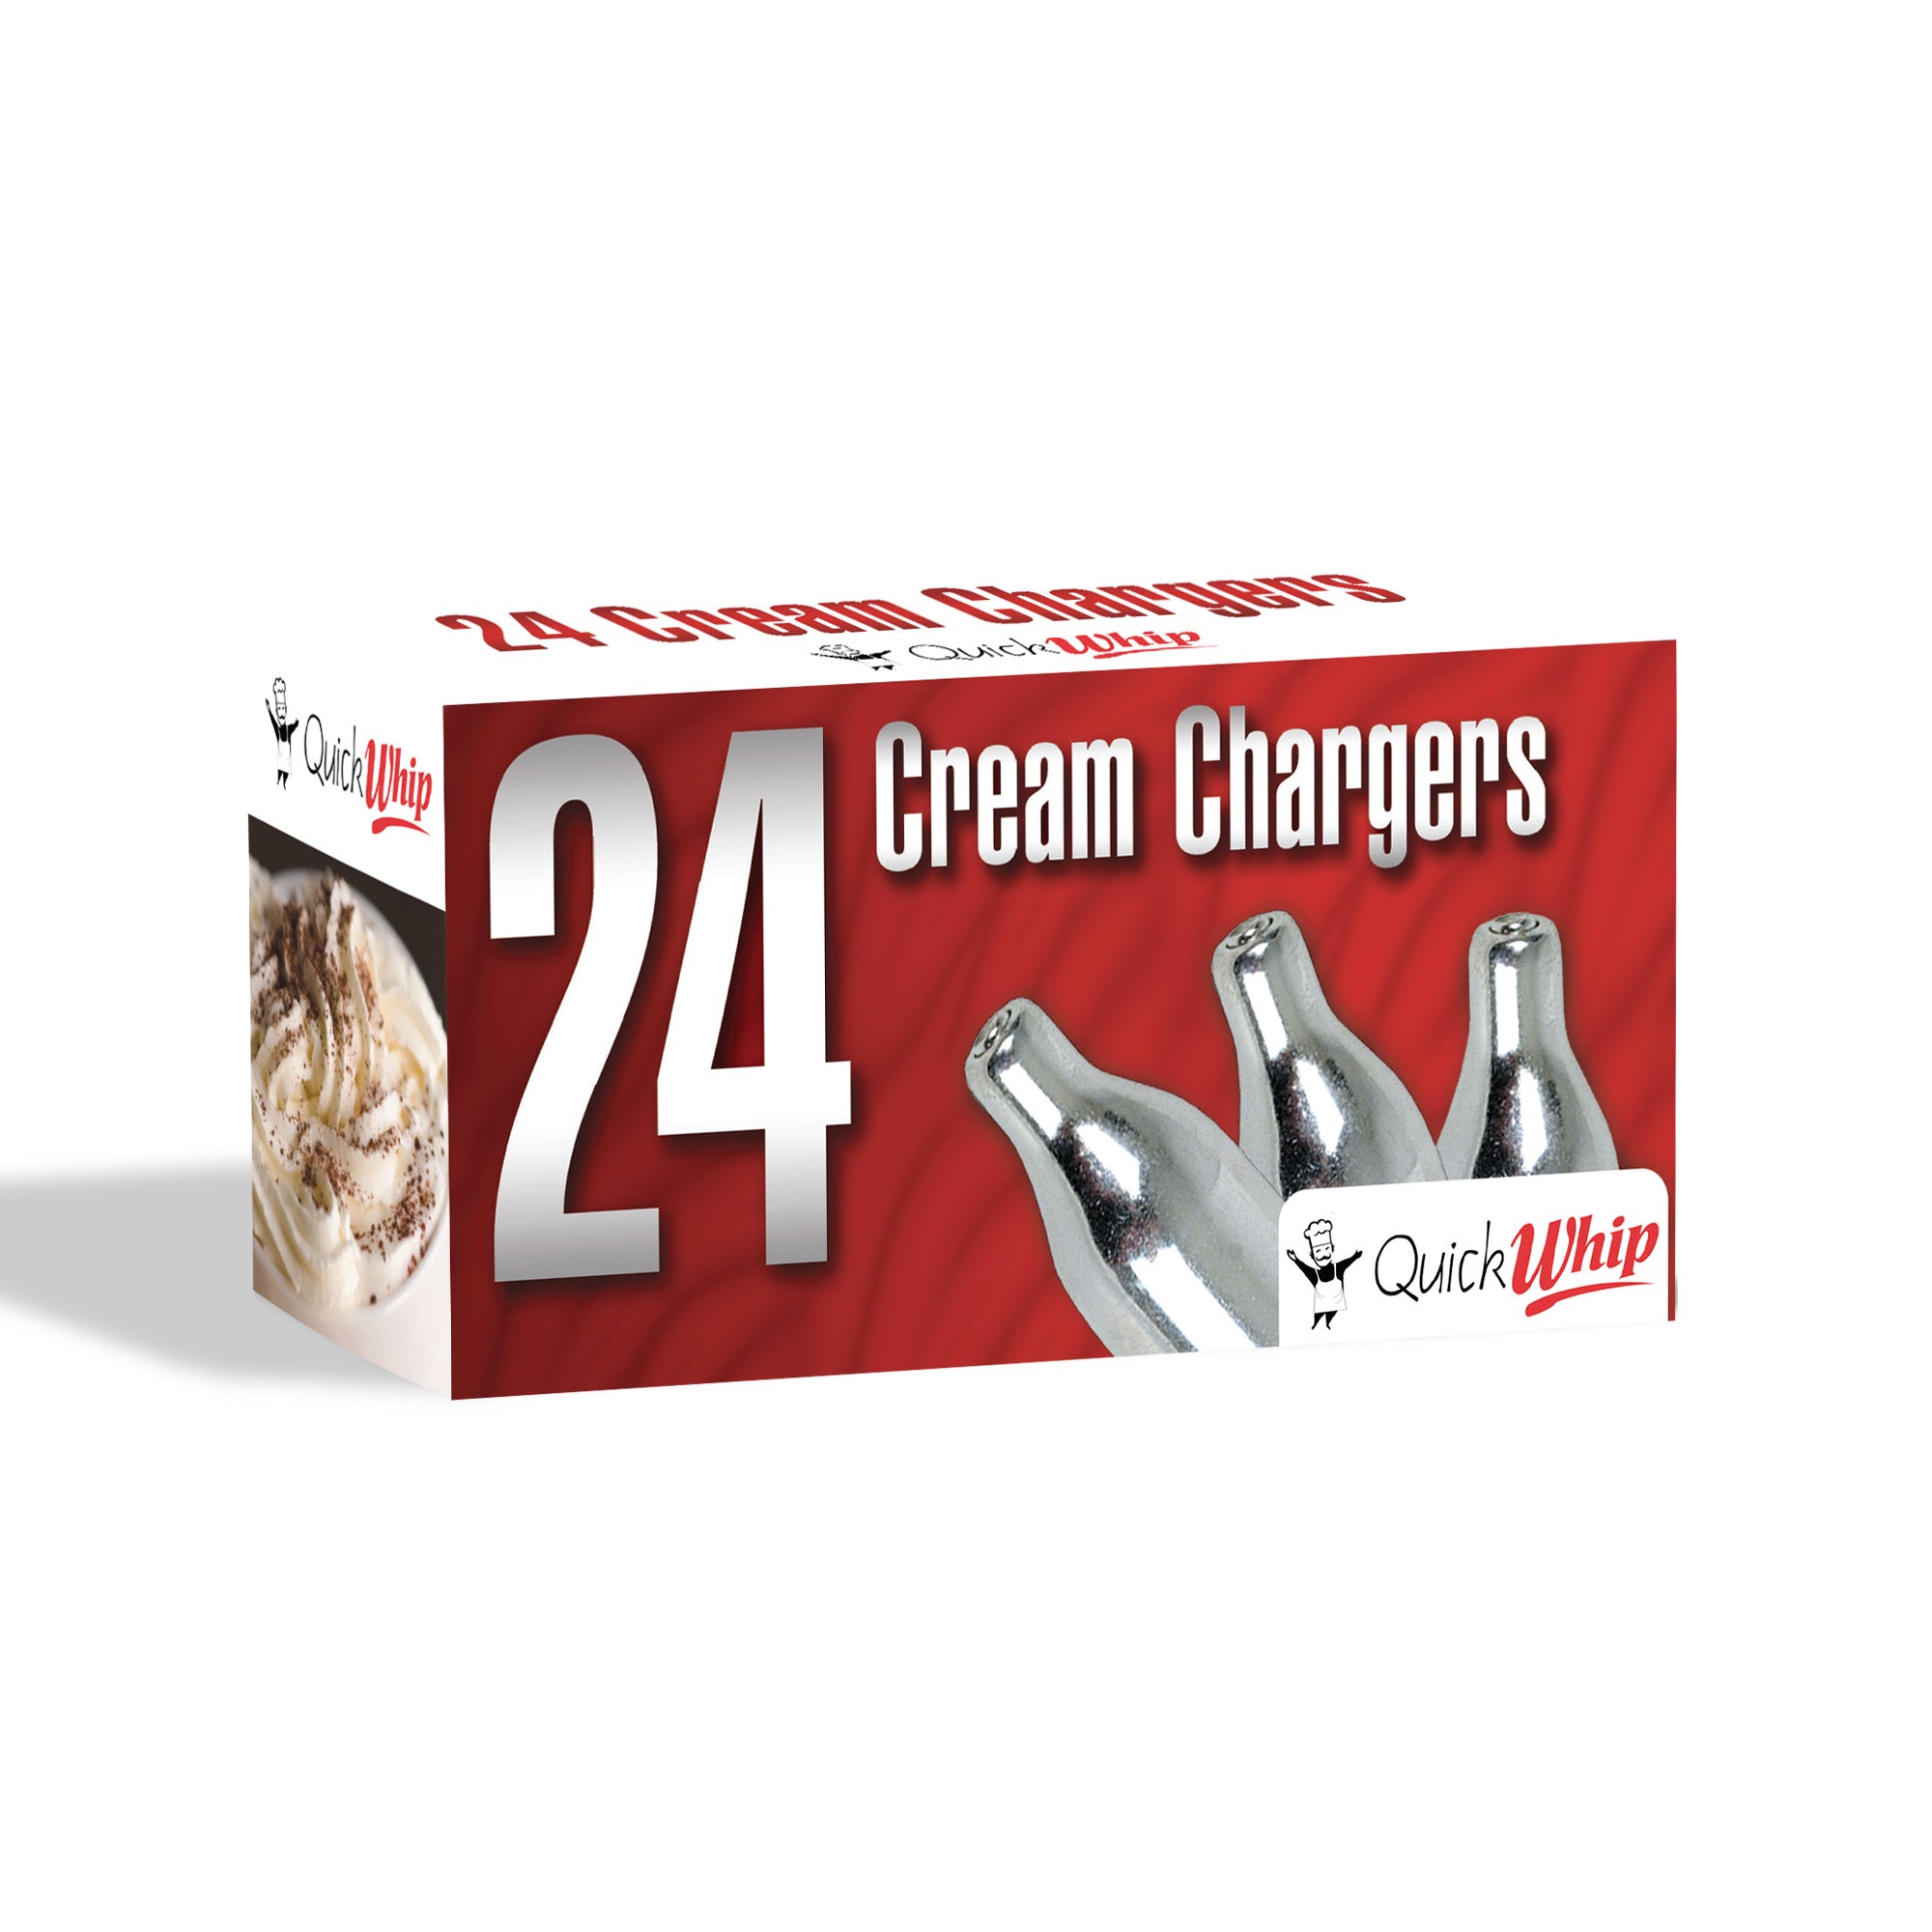 QuickWhip Cream Chargers - 24 Pack